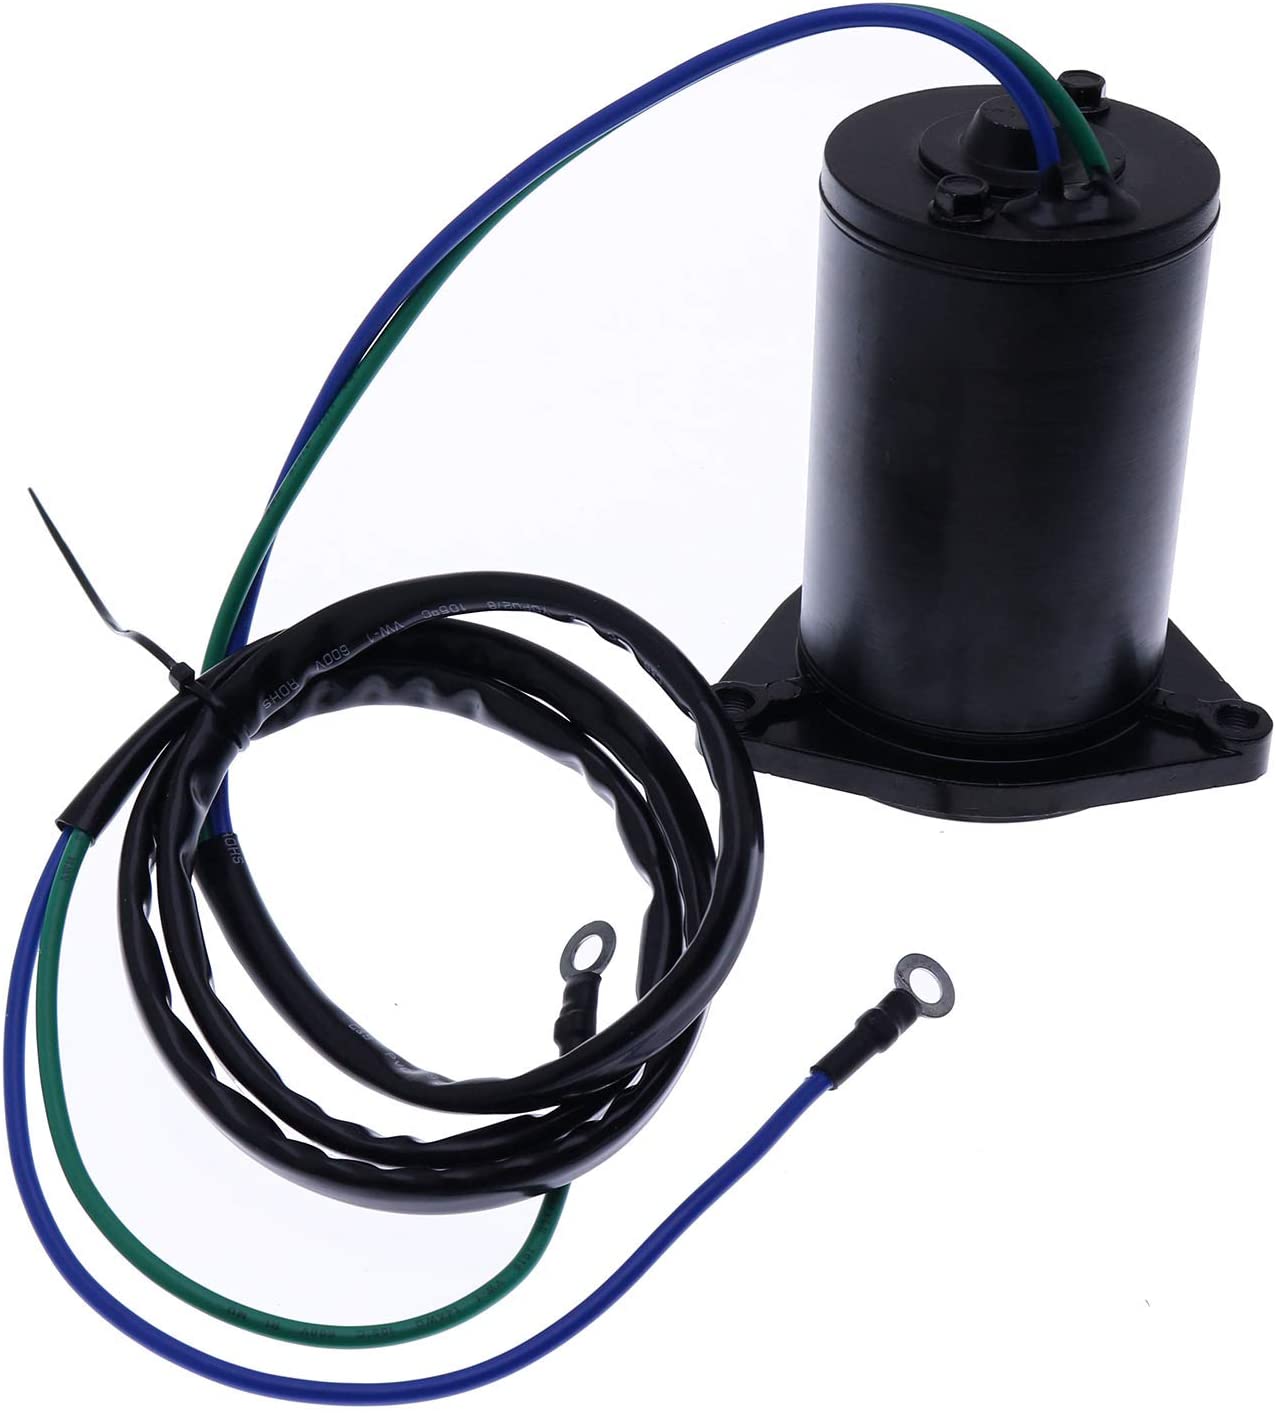 Power Tilt Trim Motor compatible with Yamaha Outboard 50-90 HP 92 93 94 95 6H1-43880-02 6H1-43880-02-00 - KUDUPARTS